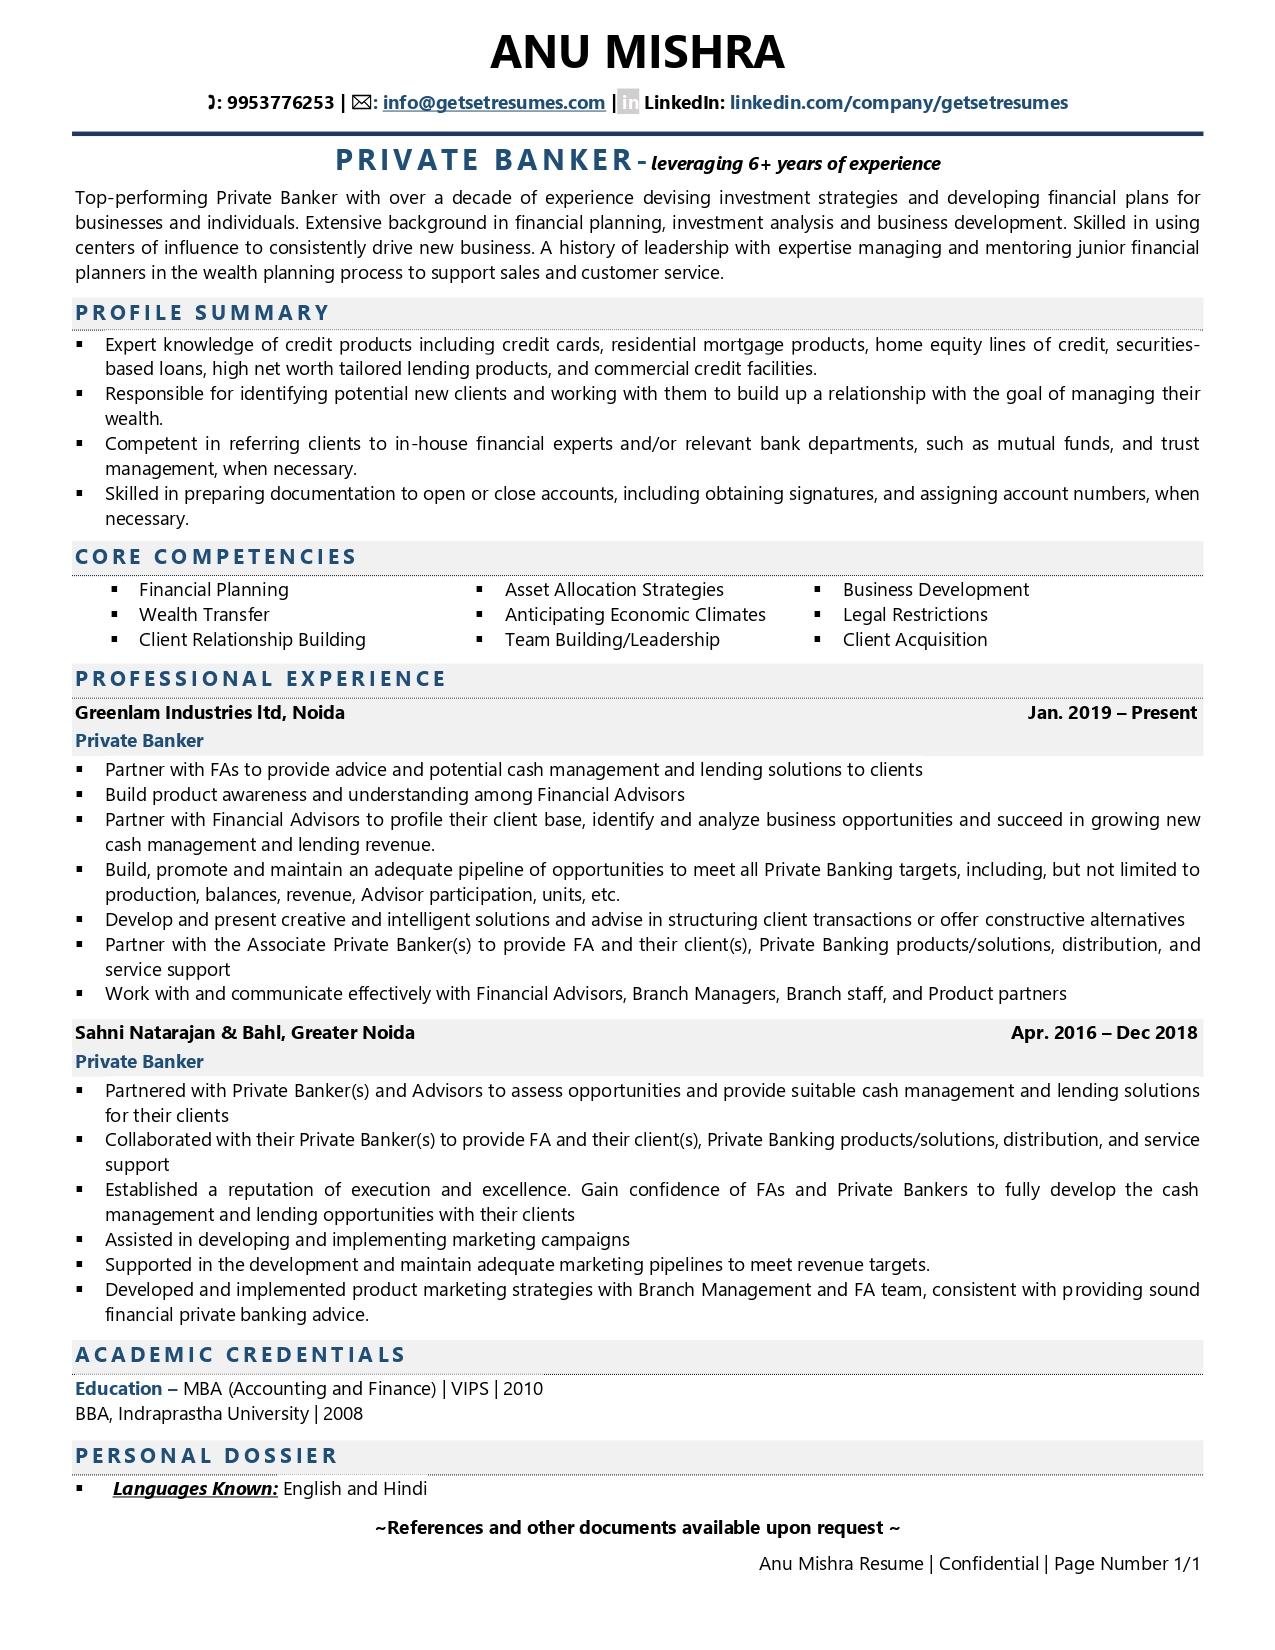 Wealth Management / Private Banker - Resume Example & Template